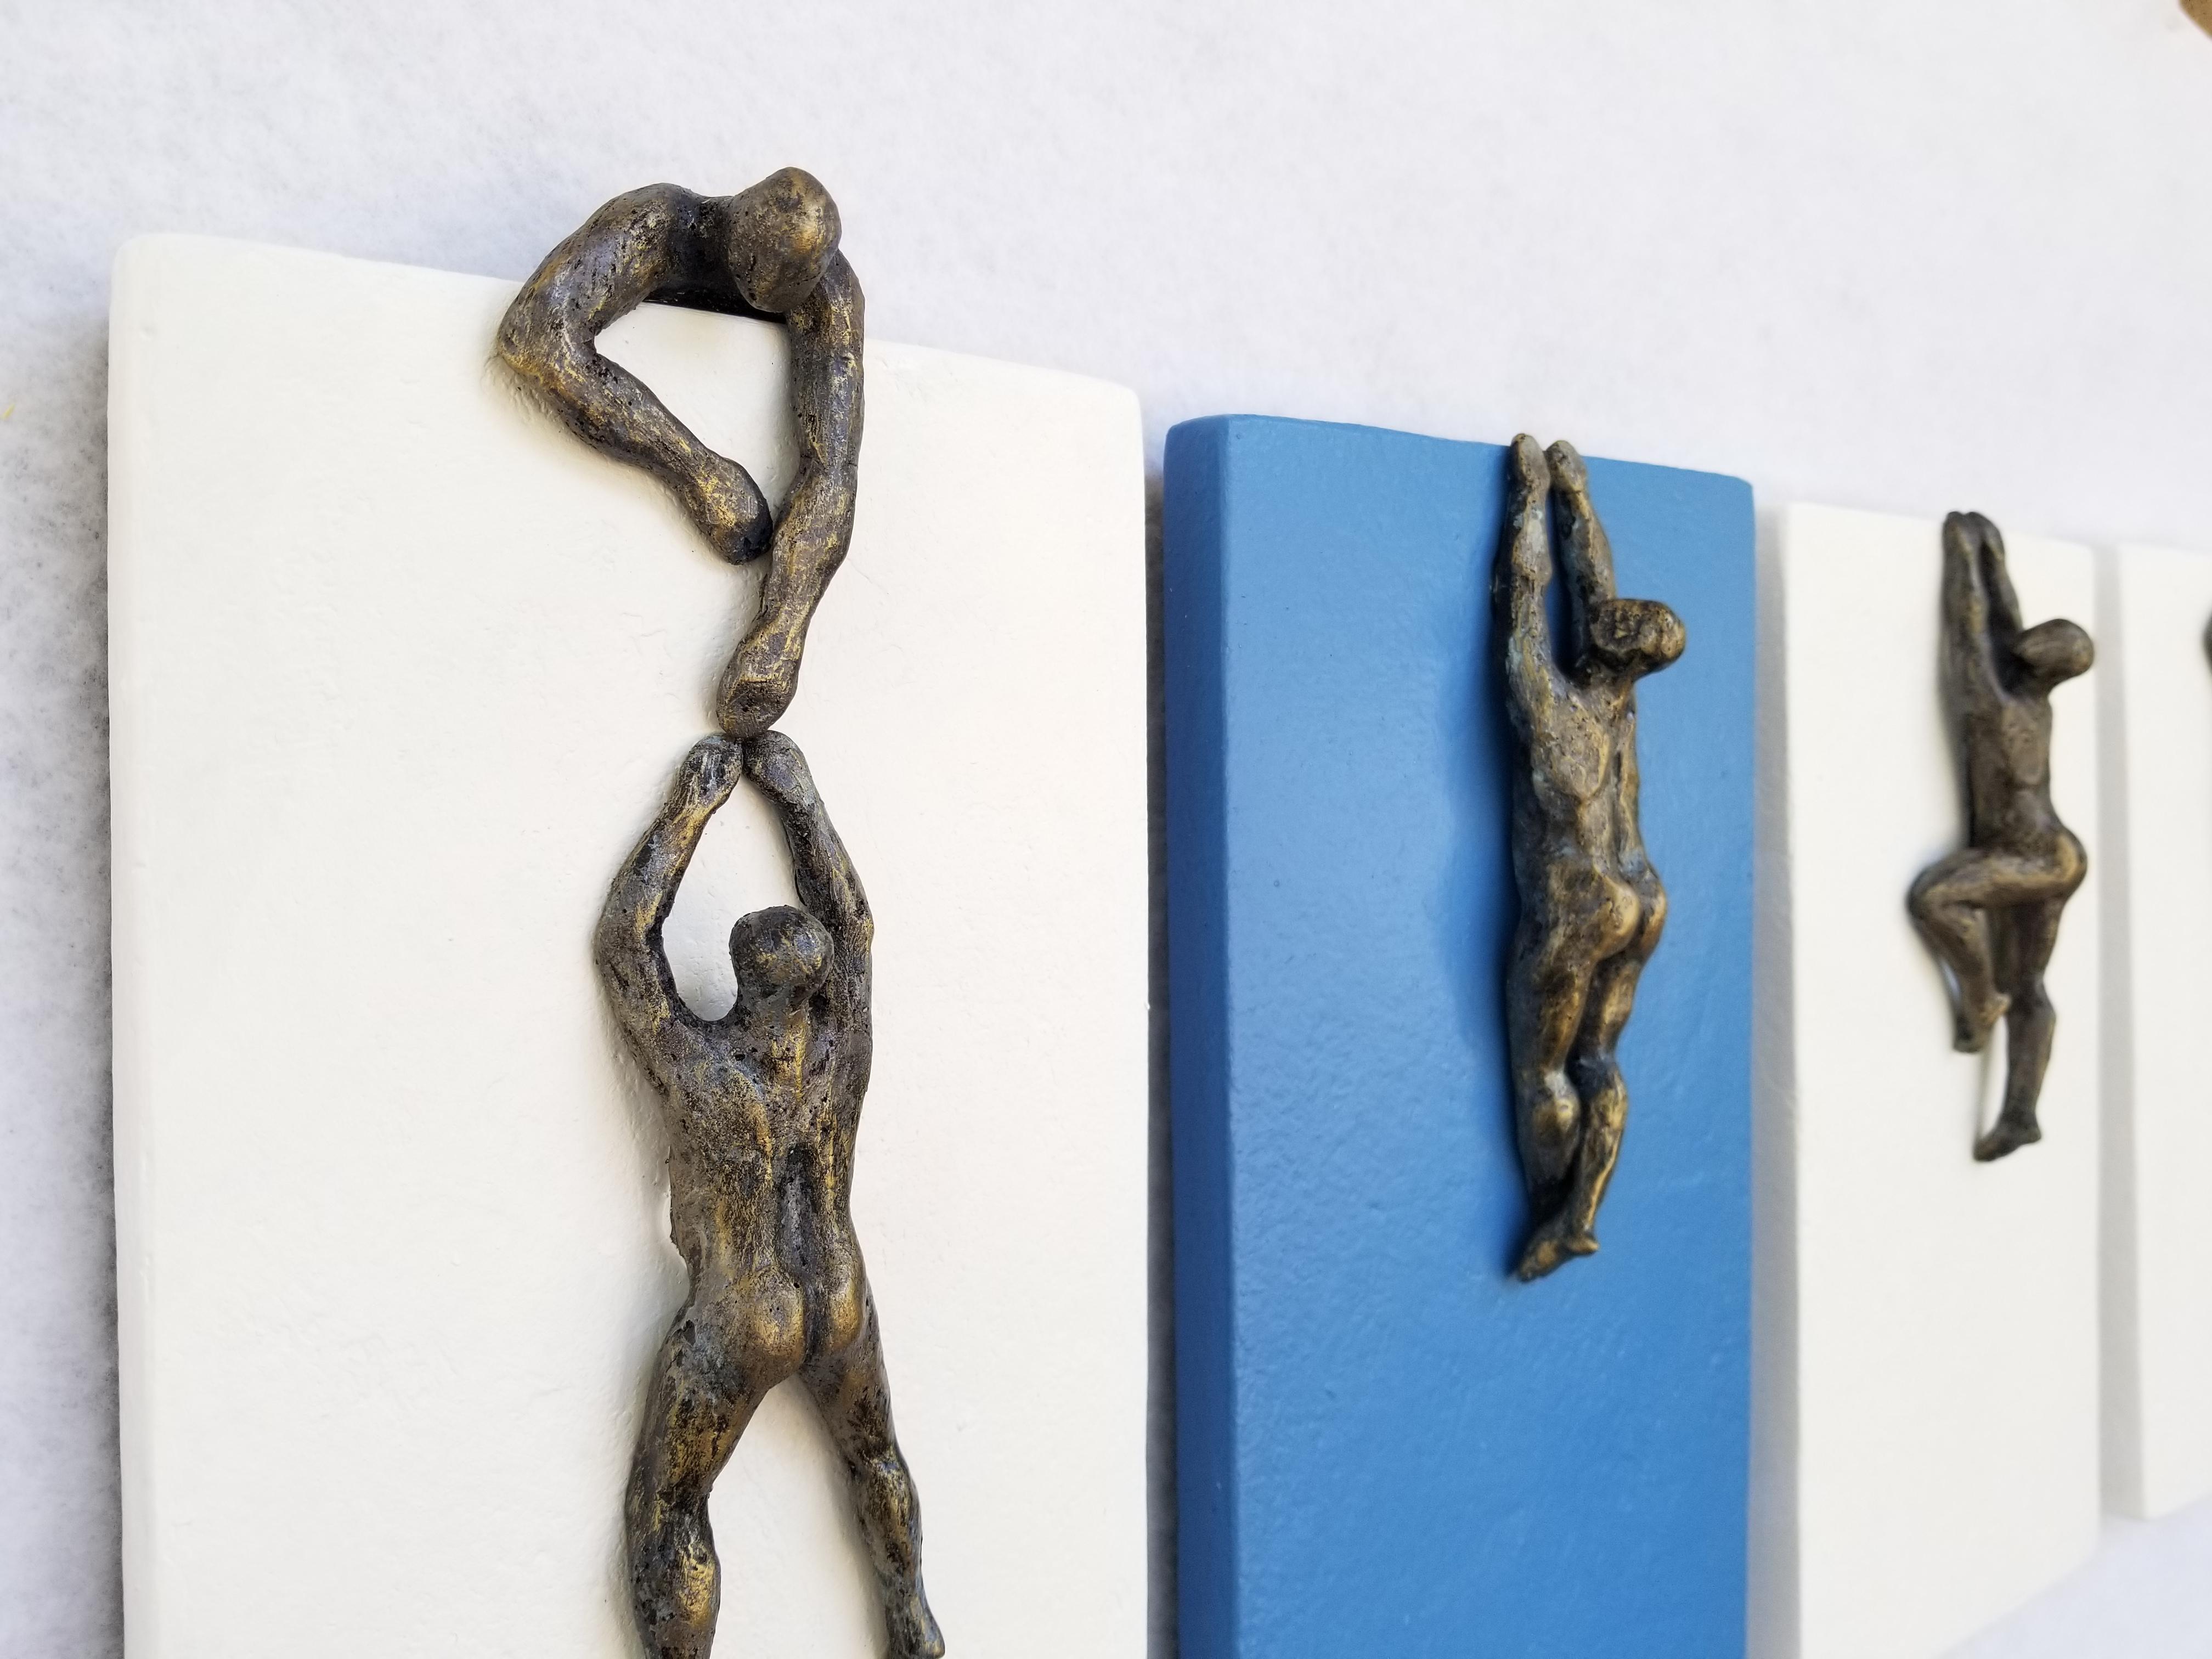 <p>Artist Comments<br>Artist Yelitza Diaz displays a modern piece of climbing figures in four minimalist panels painted in flat shades of white and blue. She paints the bronze beings dangling from the ledges, fighting their way up. Yelitza seeks to